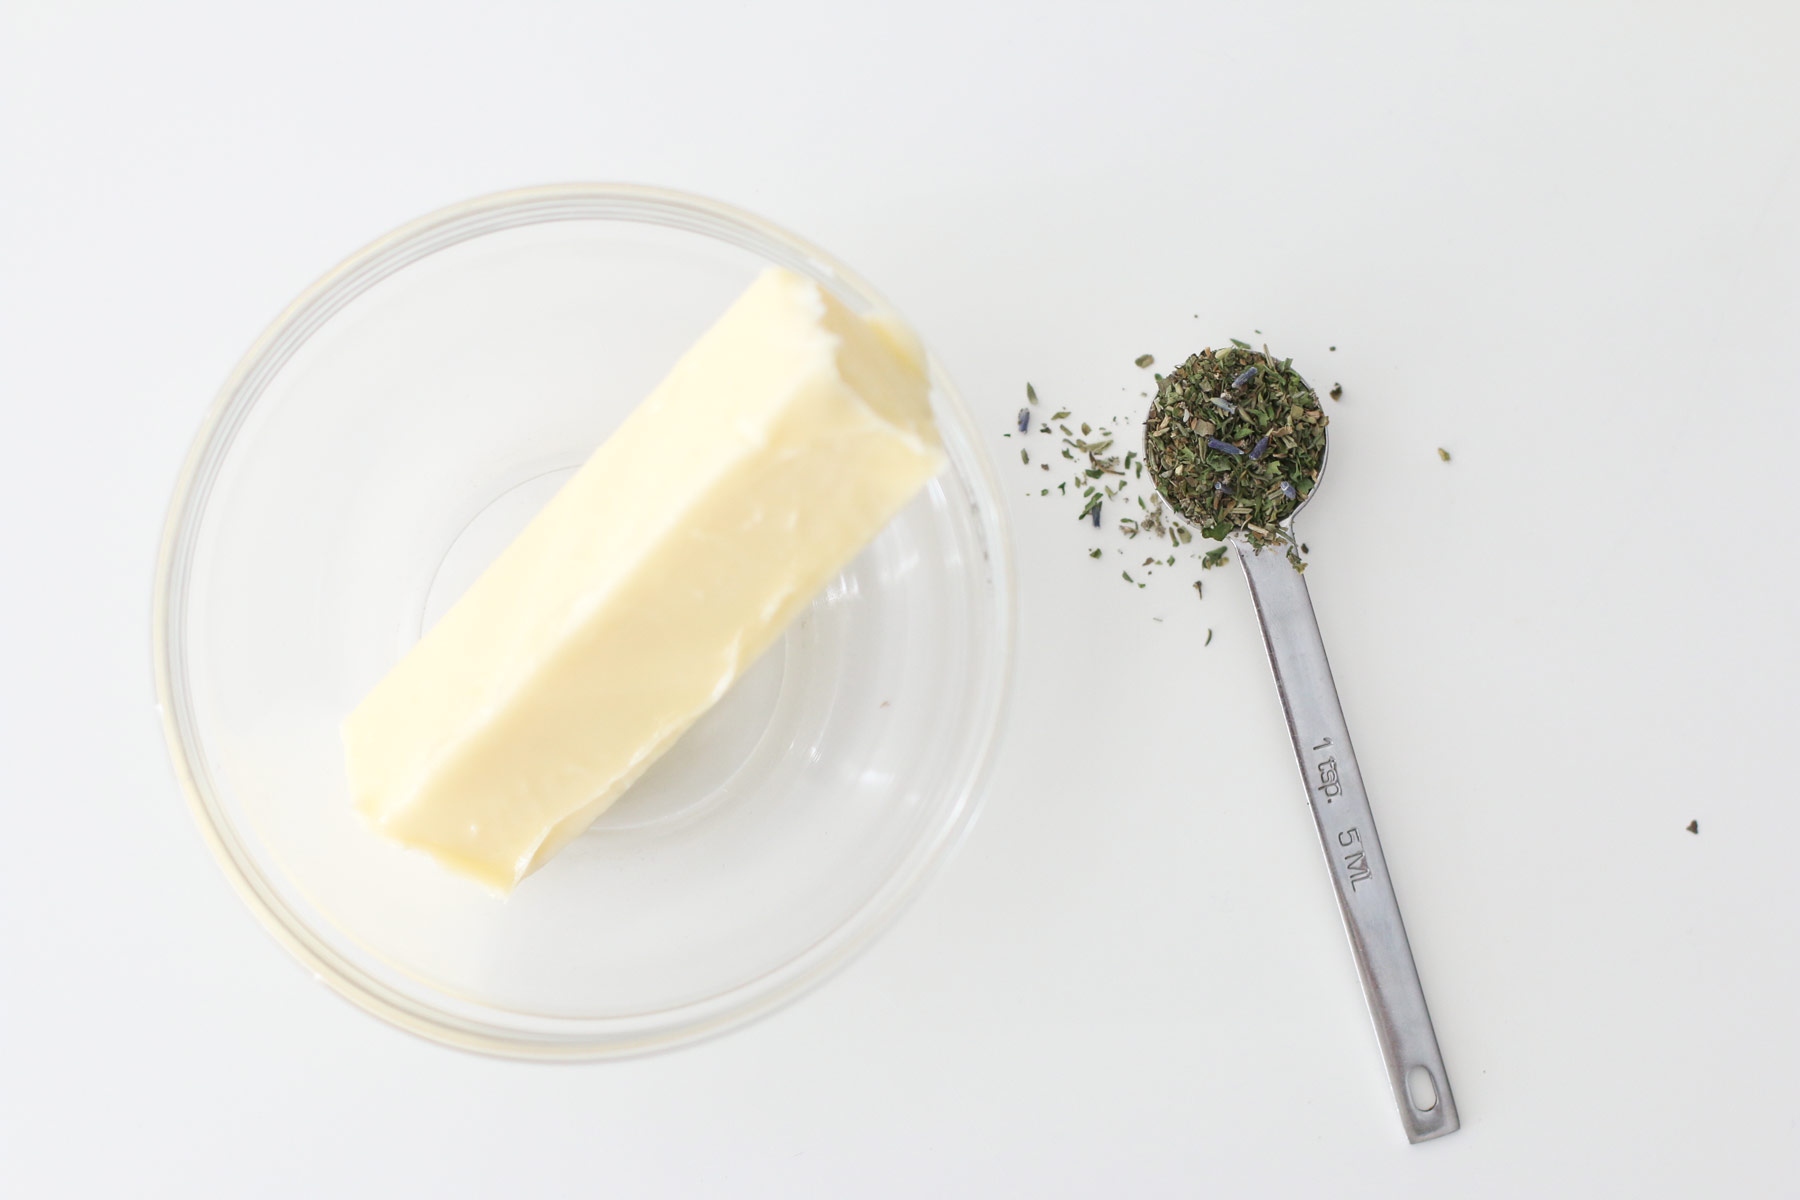 Herbed Butter with Spice Blends